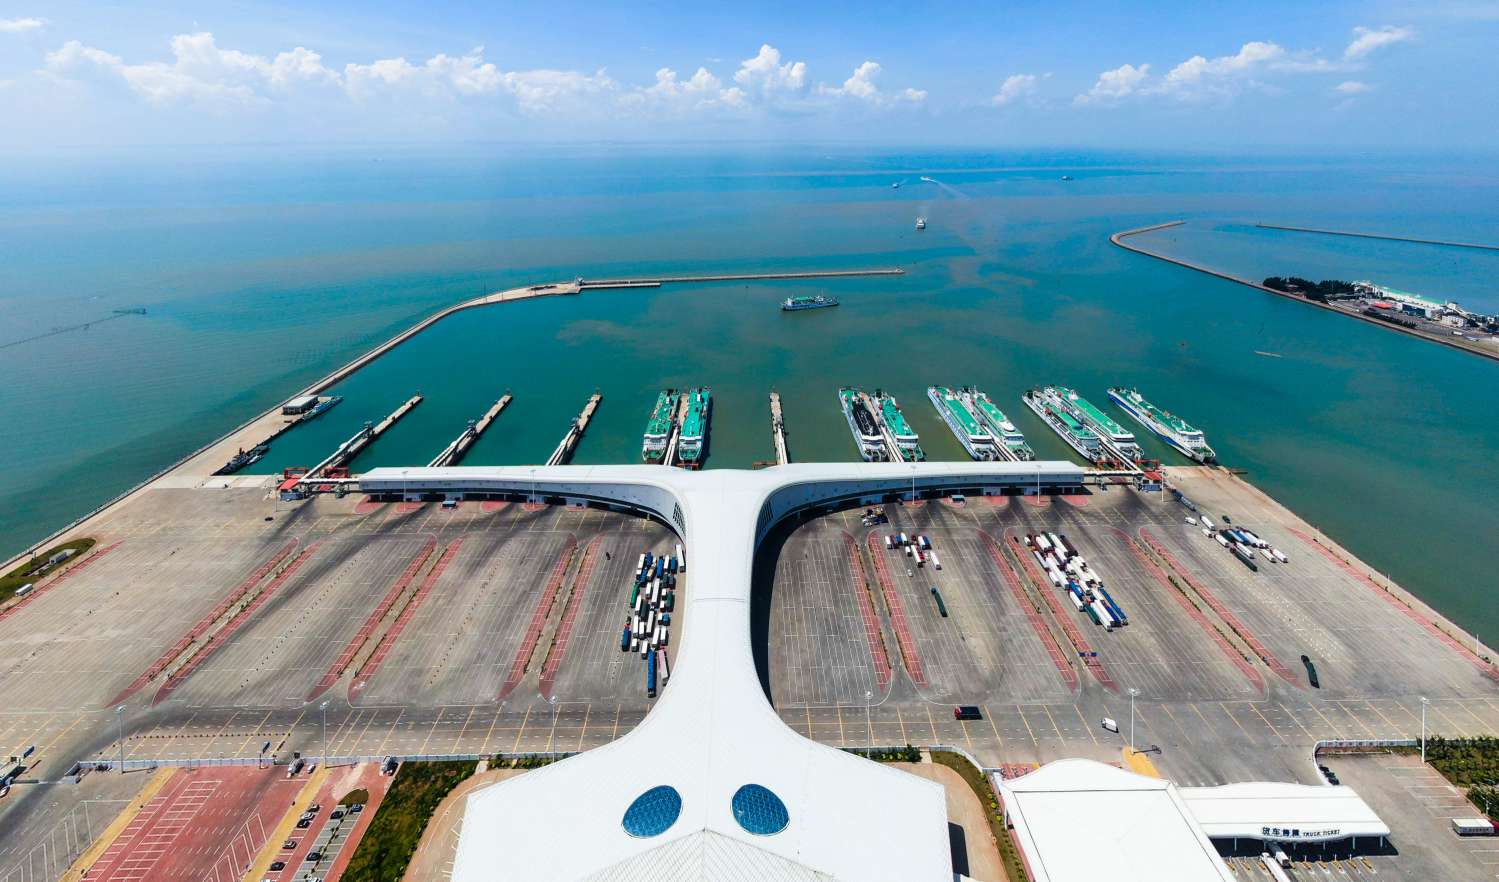 A New Chapter of Brave Tide Chart - Frontline Observation of High Quality Development in Guangdong, Fujian, and Hainan at the Frontline of Reform and Opening up - Free Trade Port | China | Qionggao